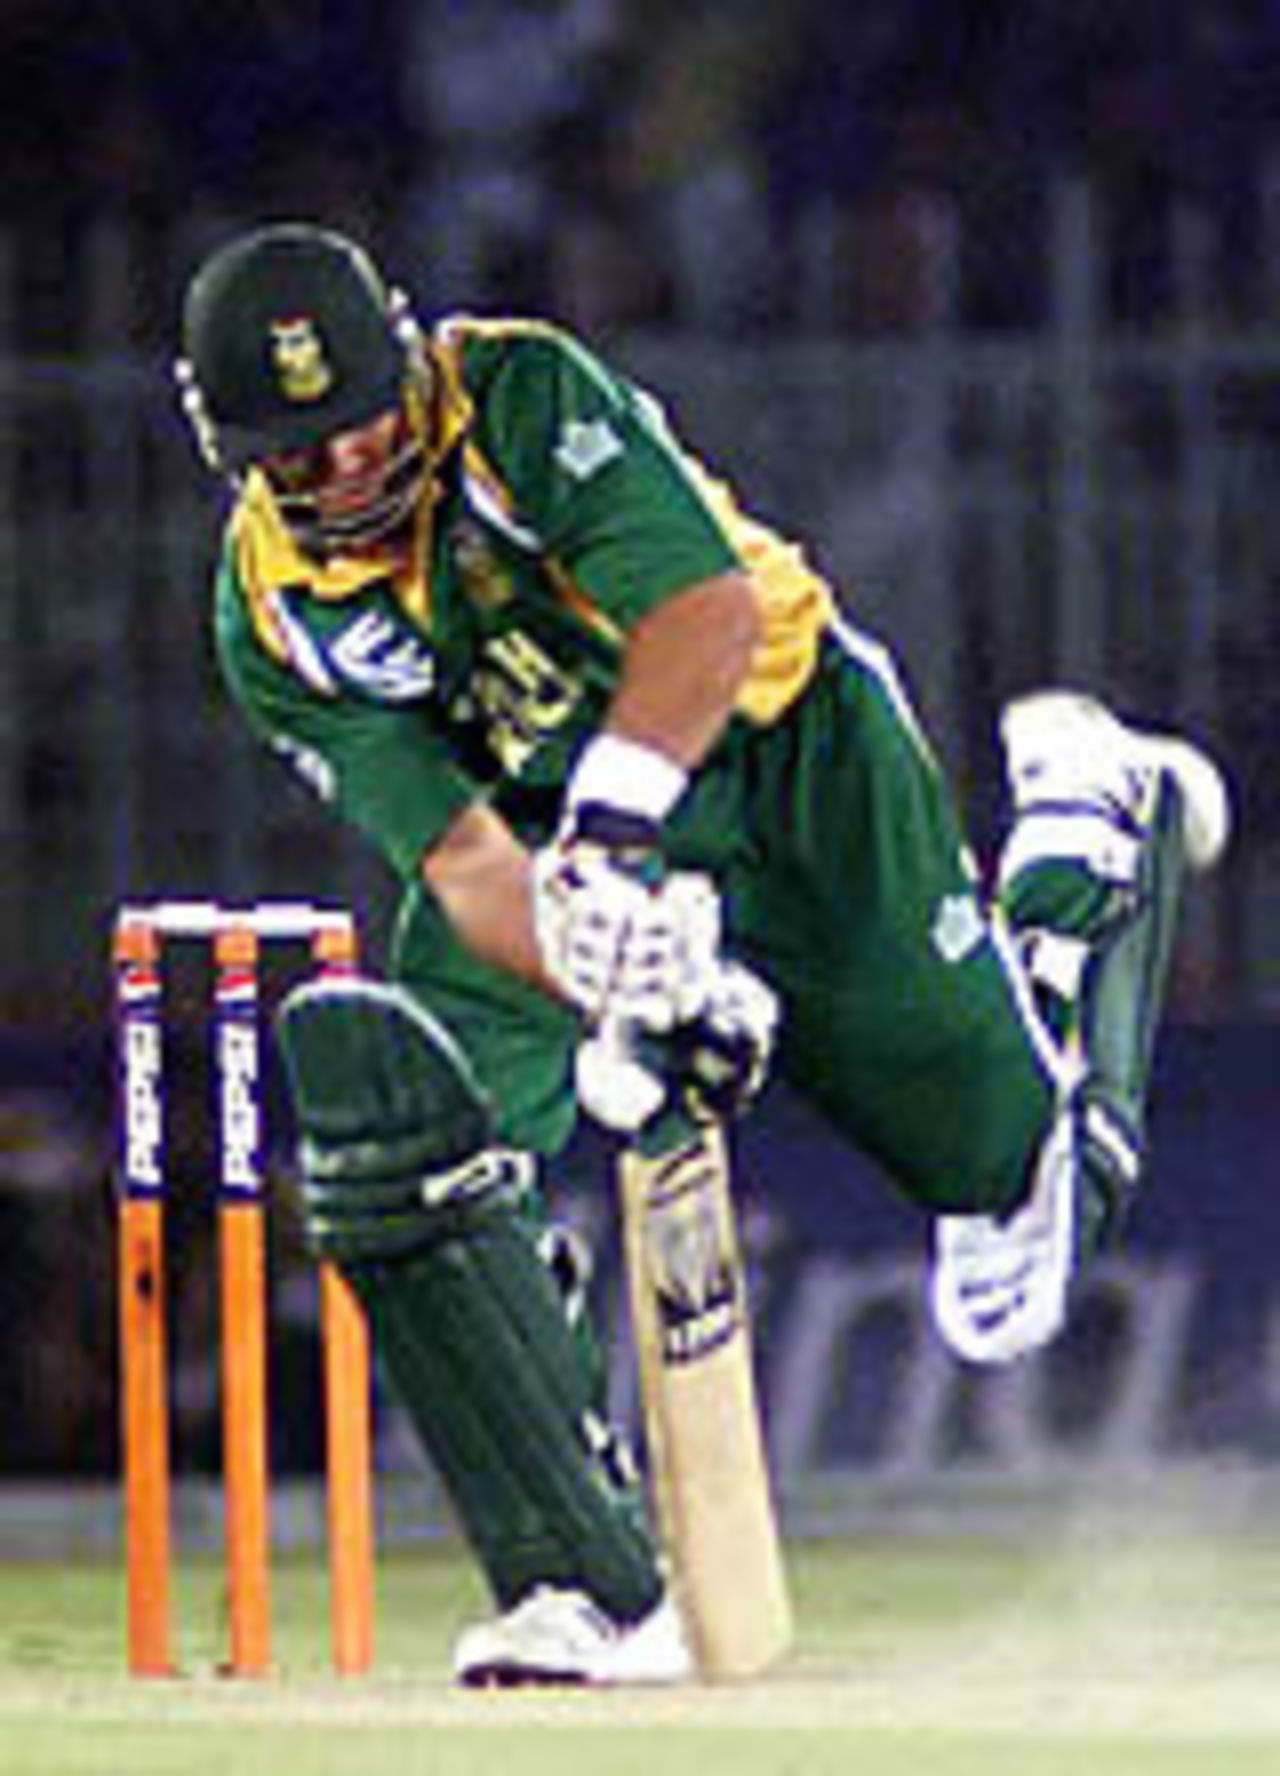 Jacques Kallis manages to keep out a Shoaib Akhtar yorker during his 58-run innings, Pakistan v South Africa, 4th ODI, Rawalpindi, October 10, 2003.